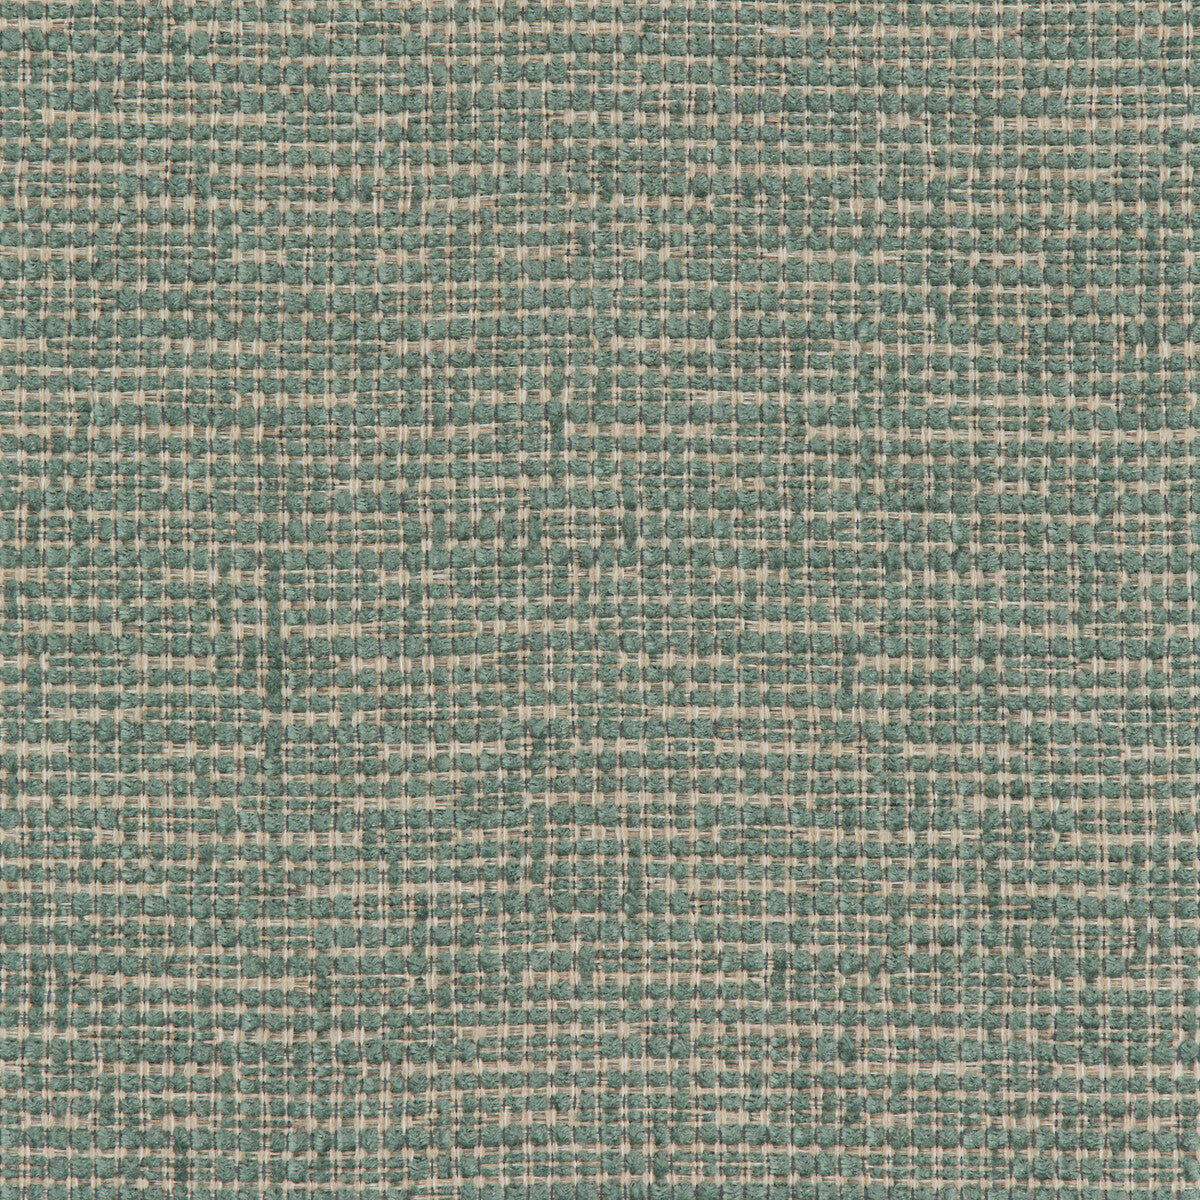 Kravet Smart fabric in 35968-35 color - pattern 35968.35.0 - by Kravet Smart in the Performance Crypton Home collection